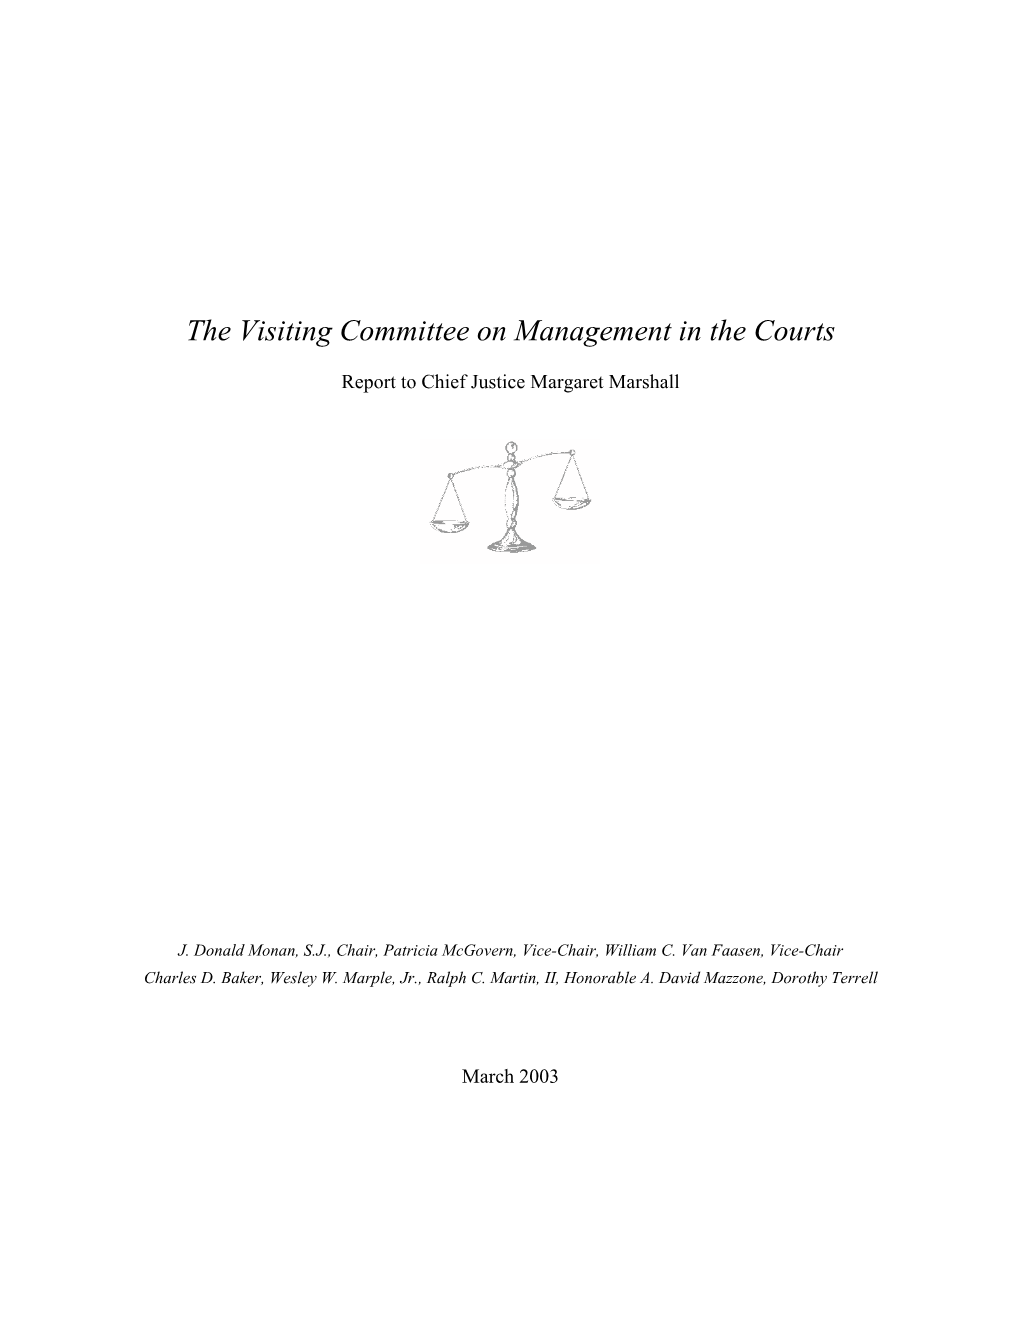 Open PDF File, 1.3 MB, for Report of the Visiting Committee on Management in the Courts